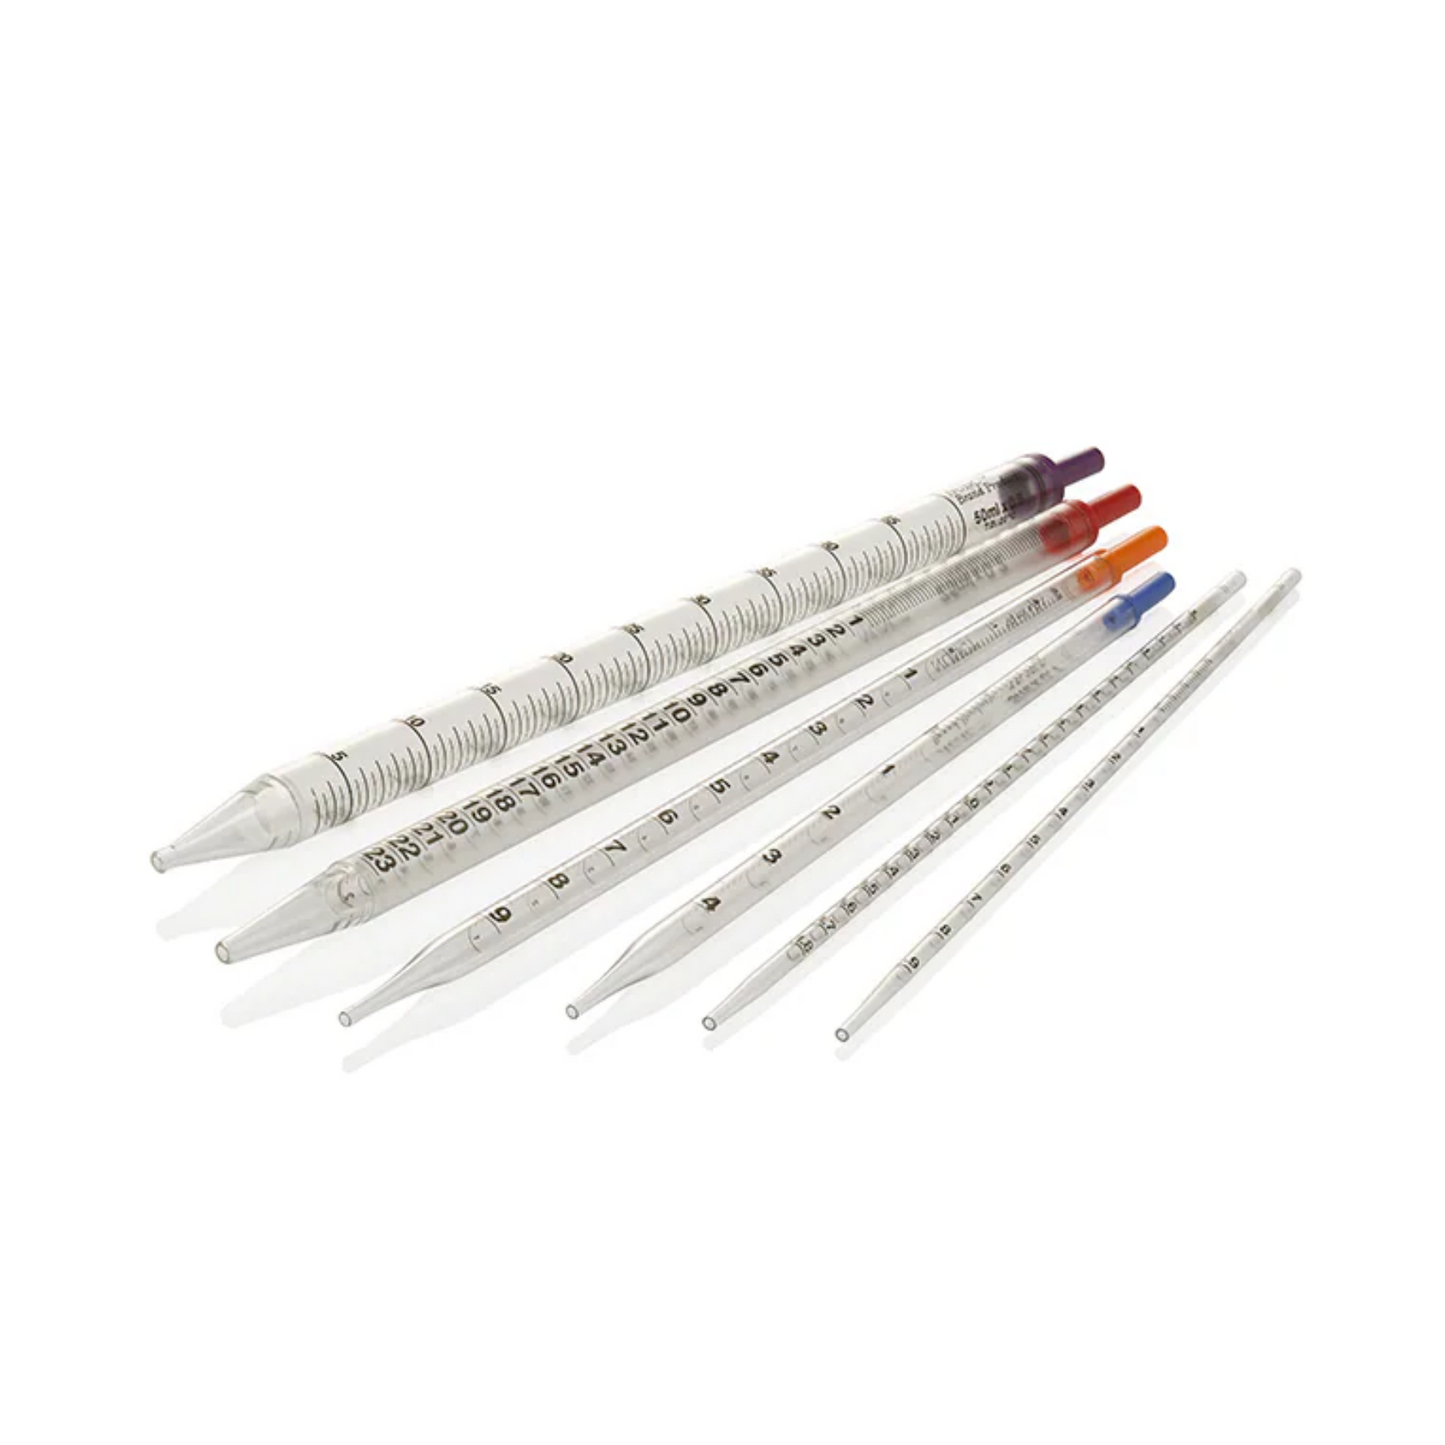 Nunc 50ml Serological Pipettes, Pack of 100 (170358)